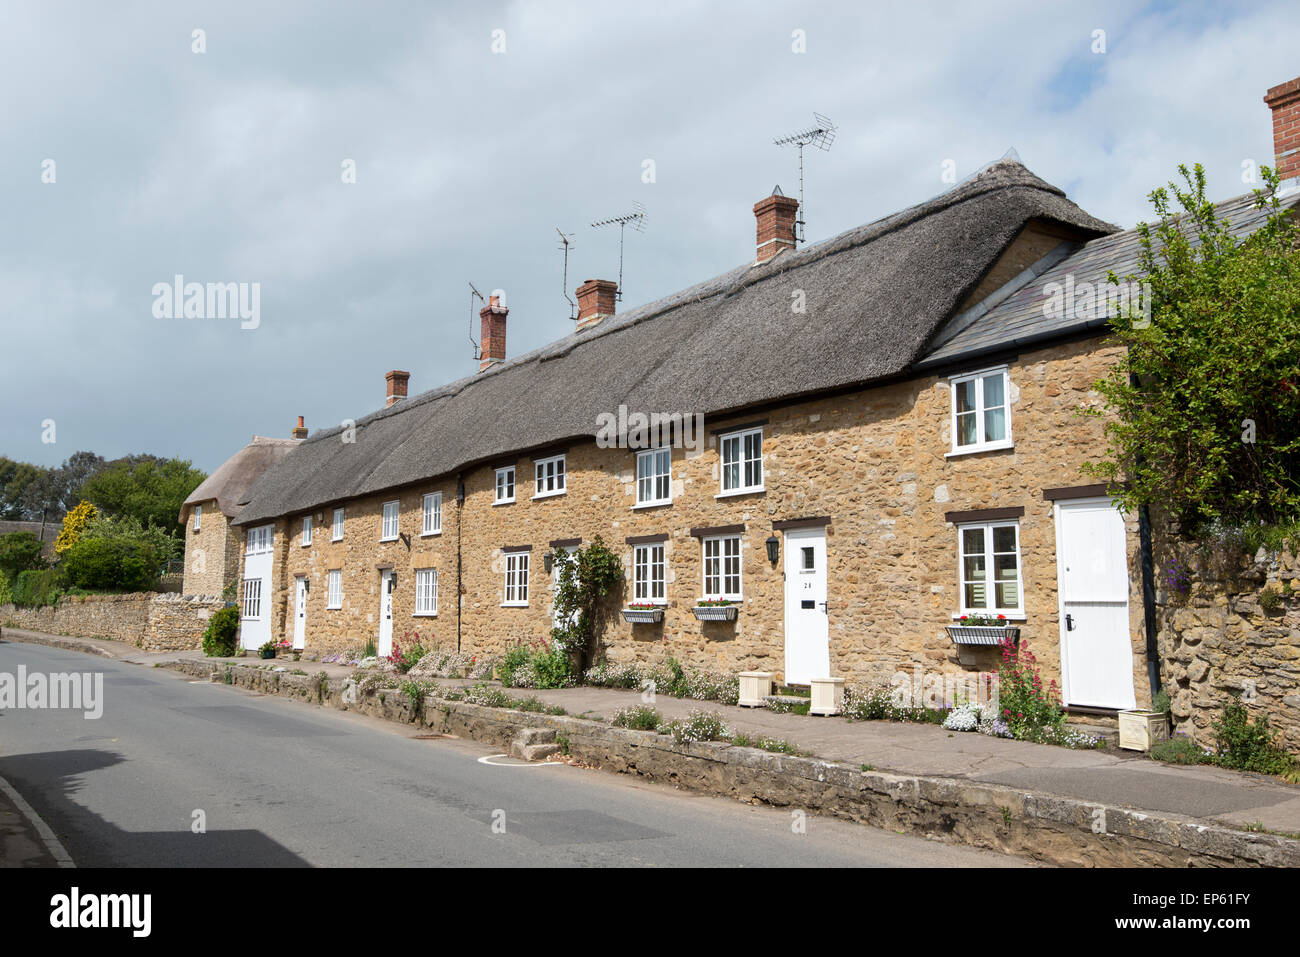 Thatched Cottages In The Picturesque Village Of Abbotsbury In